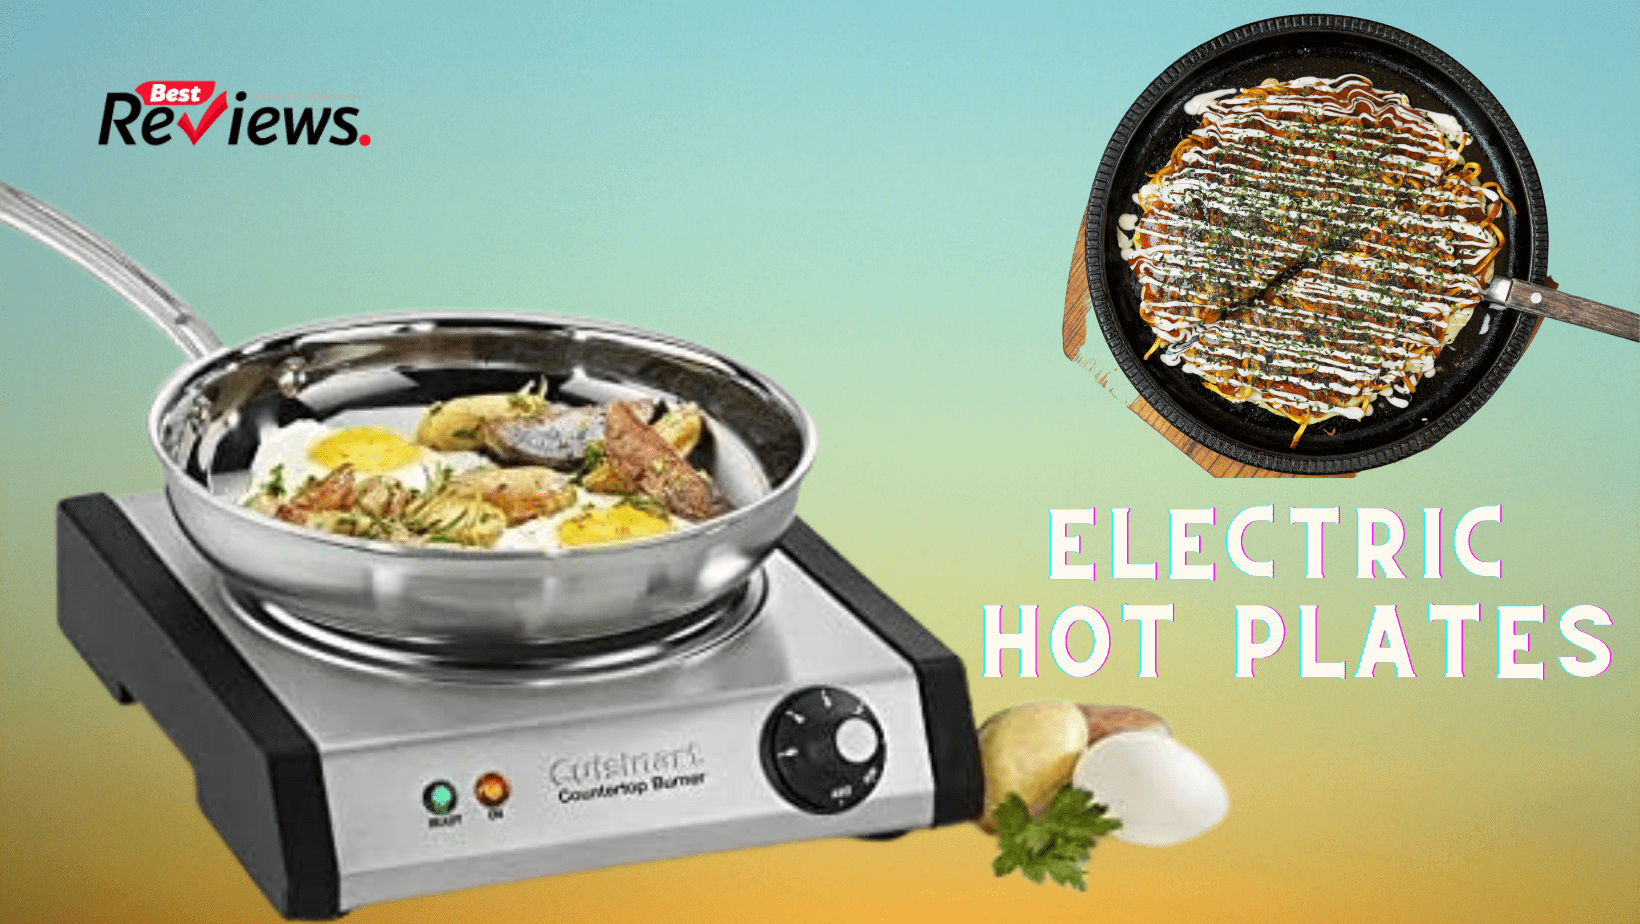 ELECTRIC HOT PLATES- best hot plate